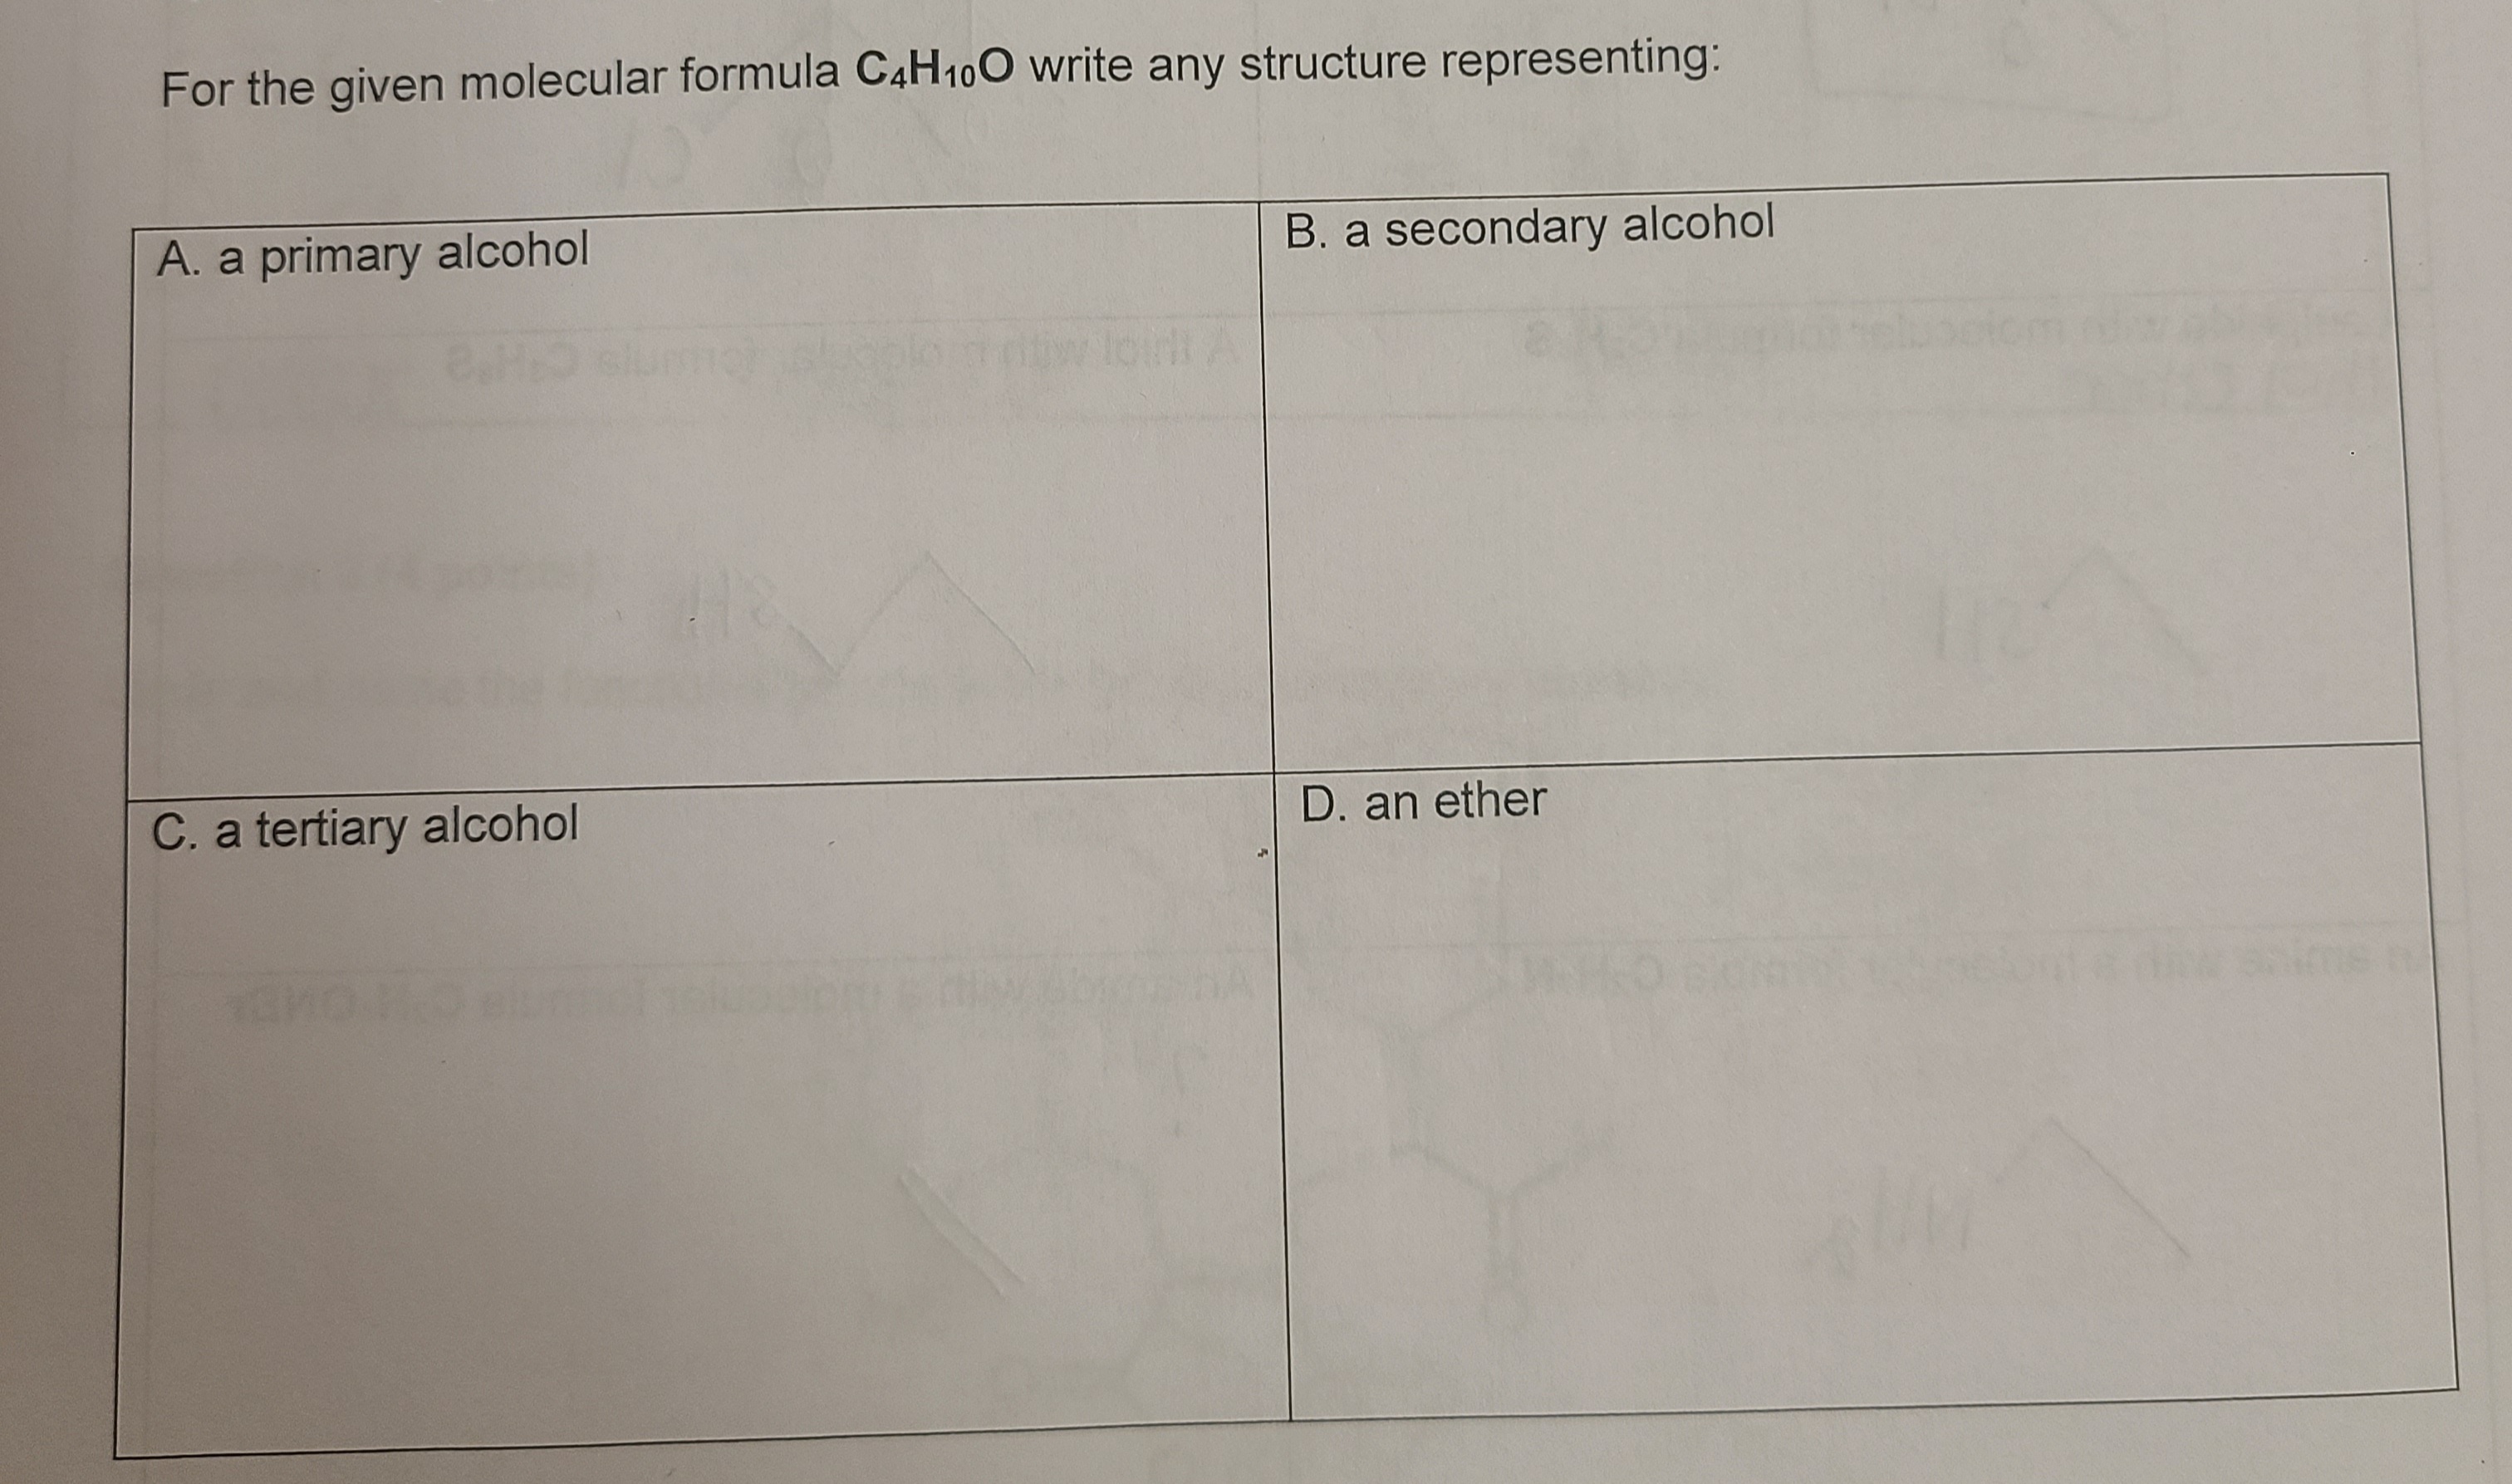 For the given molecular formula C4H100 write any structure representing:
A. a primary alcohol
B. a secondary alcohol
C. a tertiary alcohol
D. an ether
